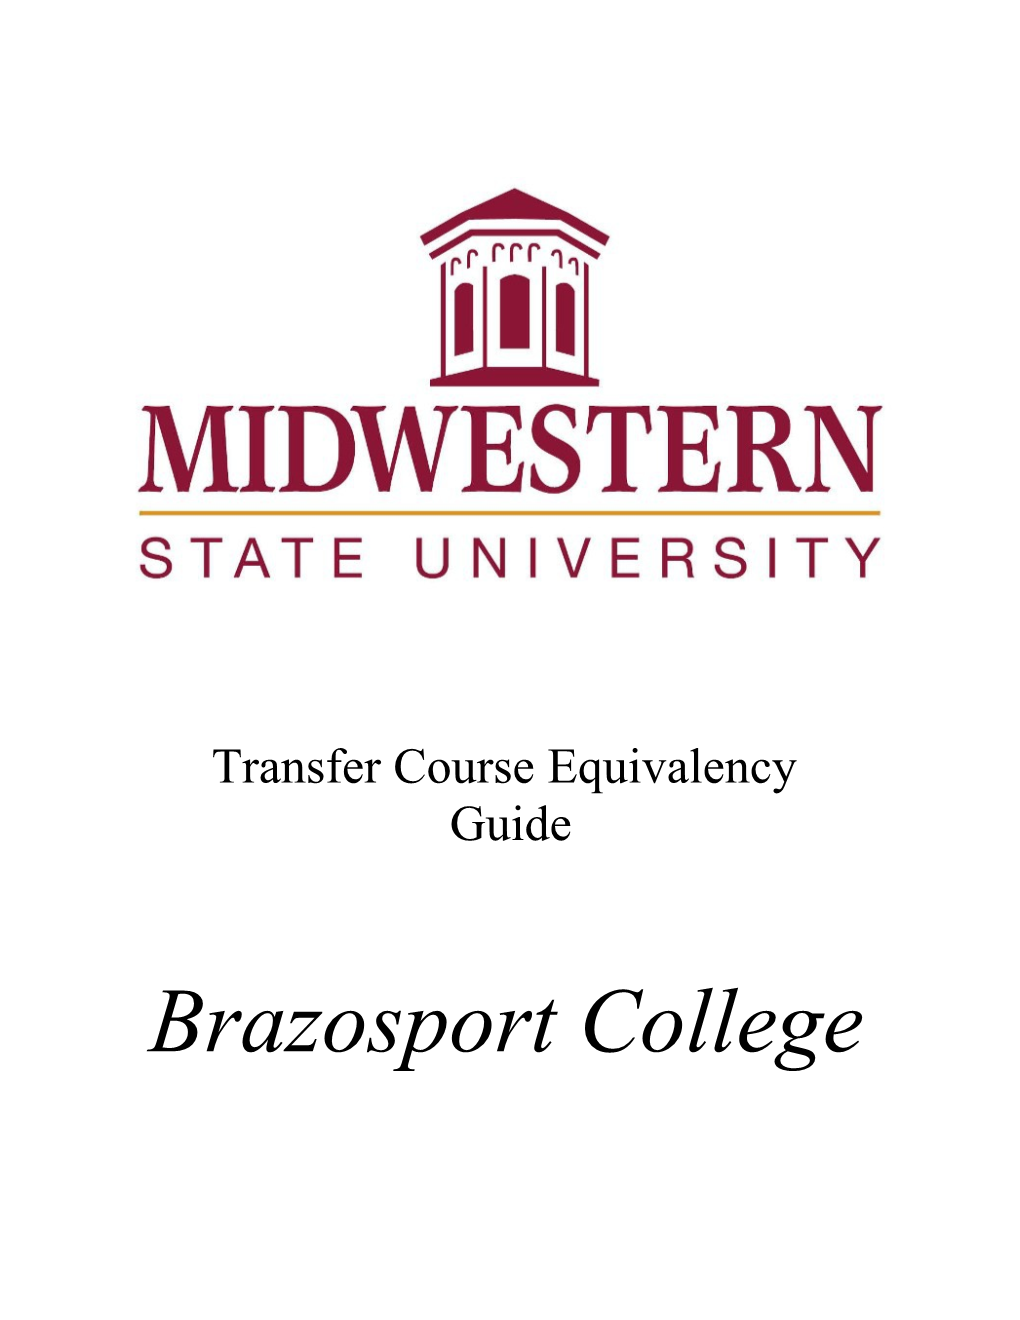 Use This Checklist to Mark the Courses Taken at Brazosport College